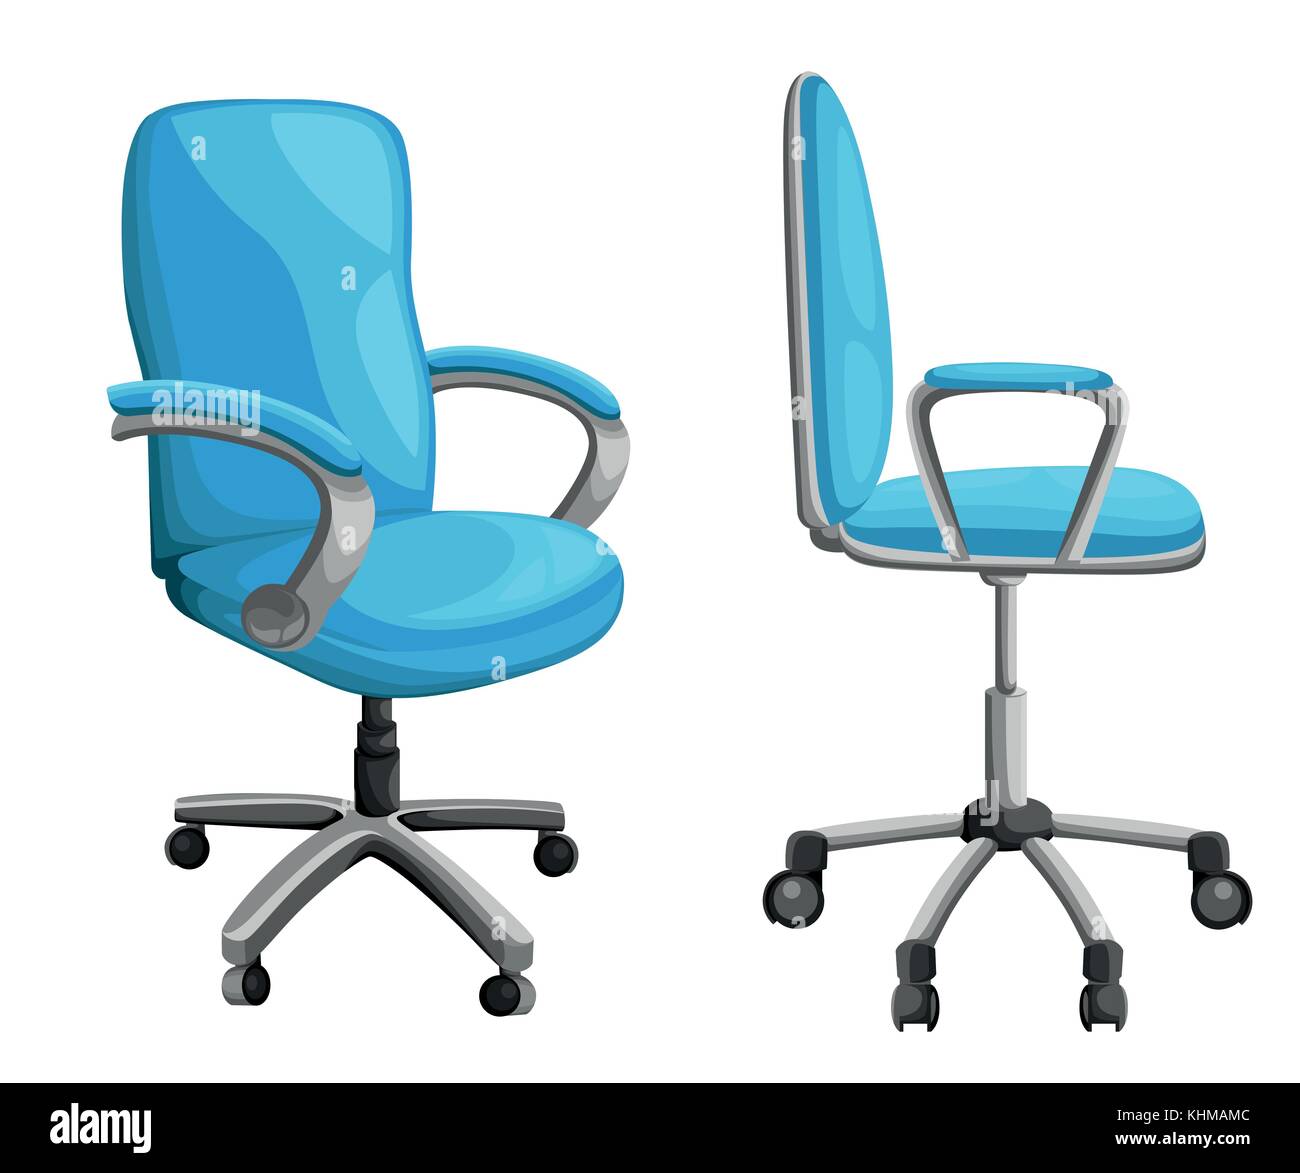 Office or desk chair in various points of view. Armchair or stool in front, back, side angles. Corporate castor furniture flat icon design. Vector ill Stock Vector